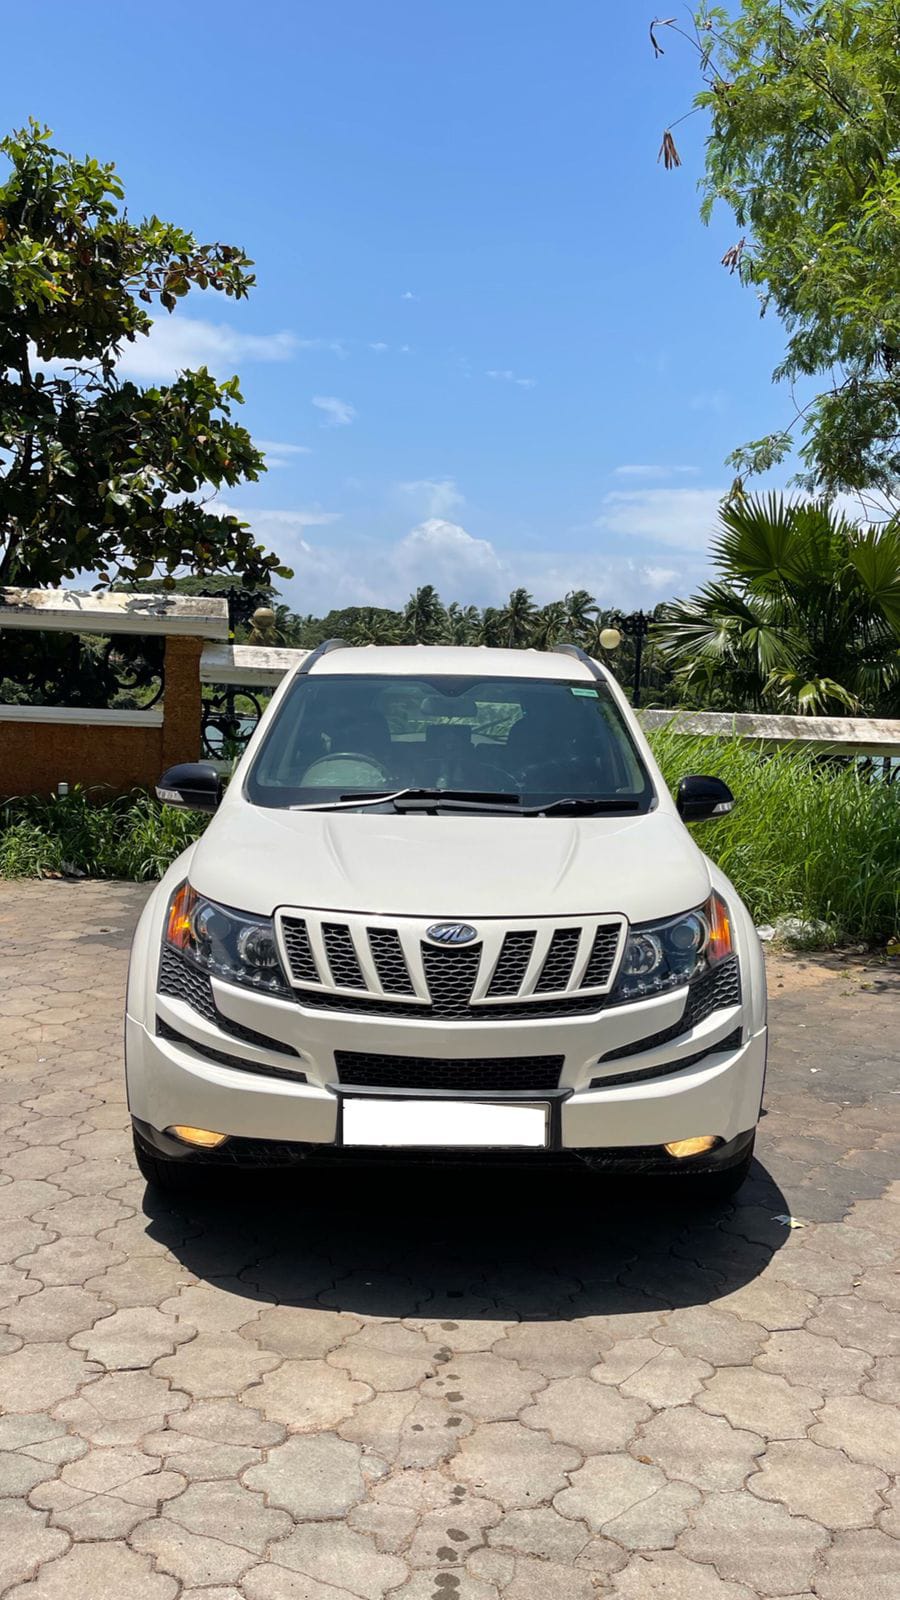 4268-for-sale-Mahindra-XUV-500-Diesel-First-Owner-2013-PY-registered-rs-690000